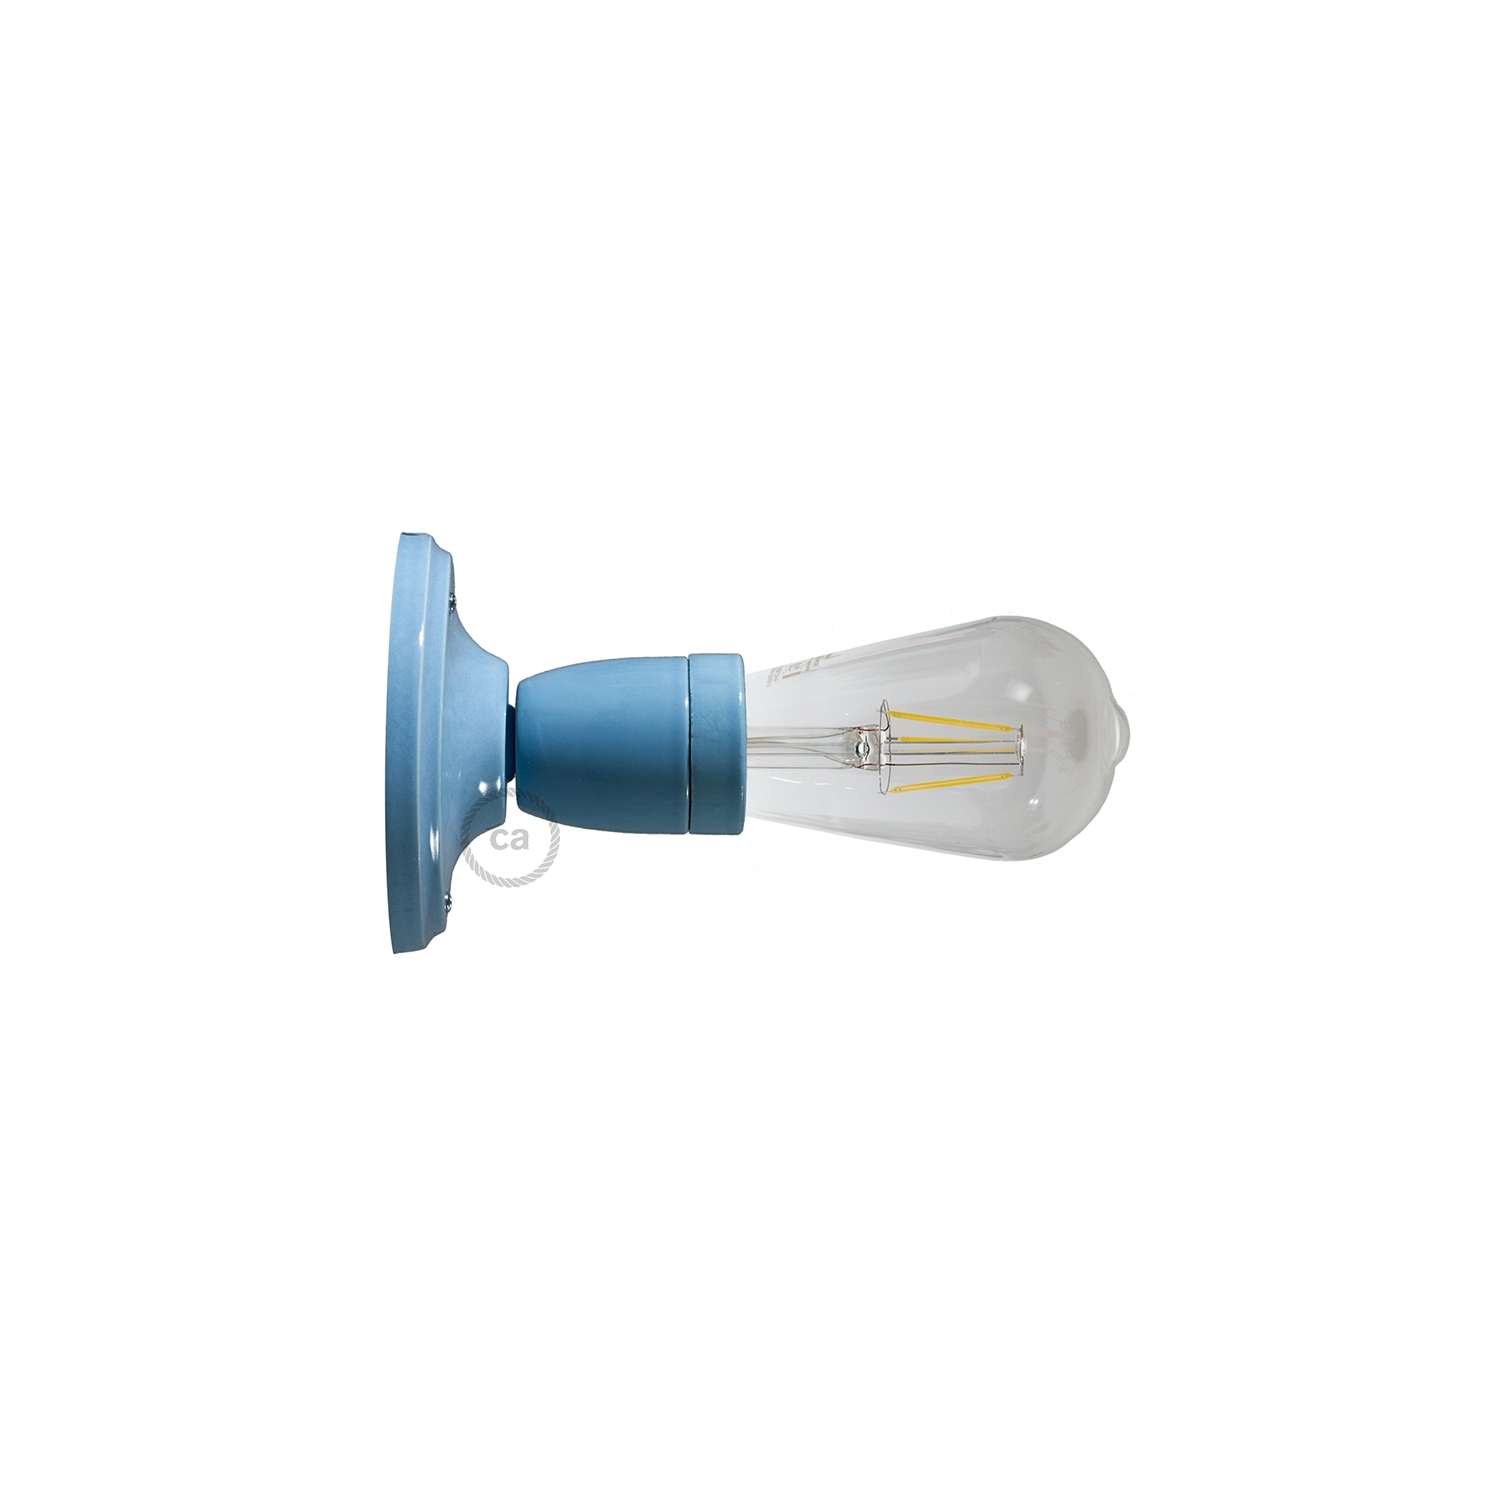 Fermaluce Classic, the wall or ceiling light source in light blue porcelain.